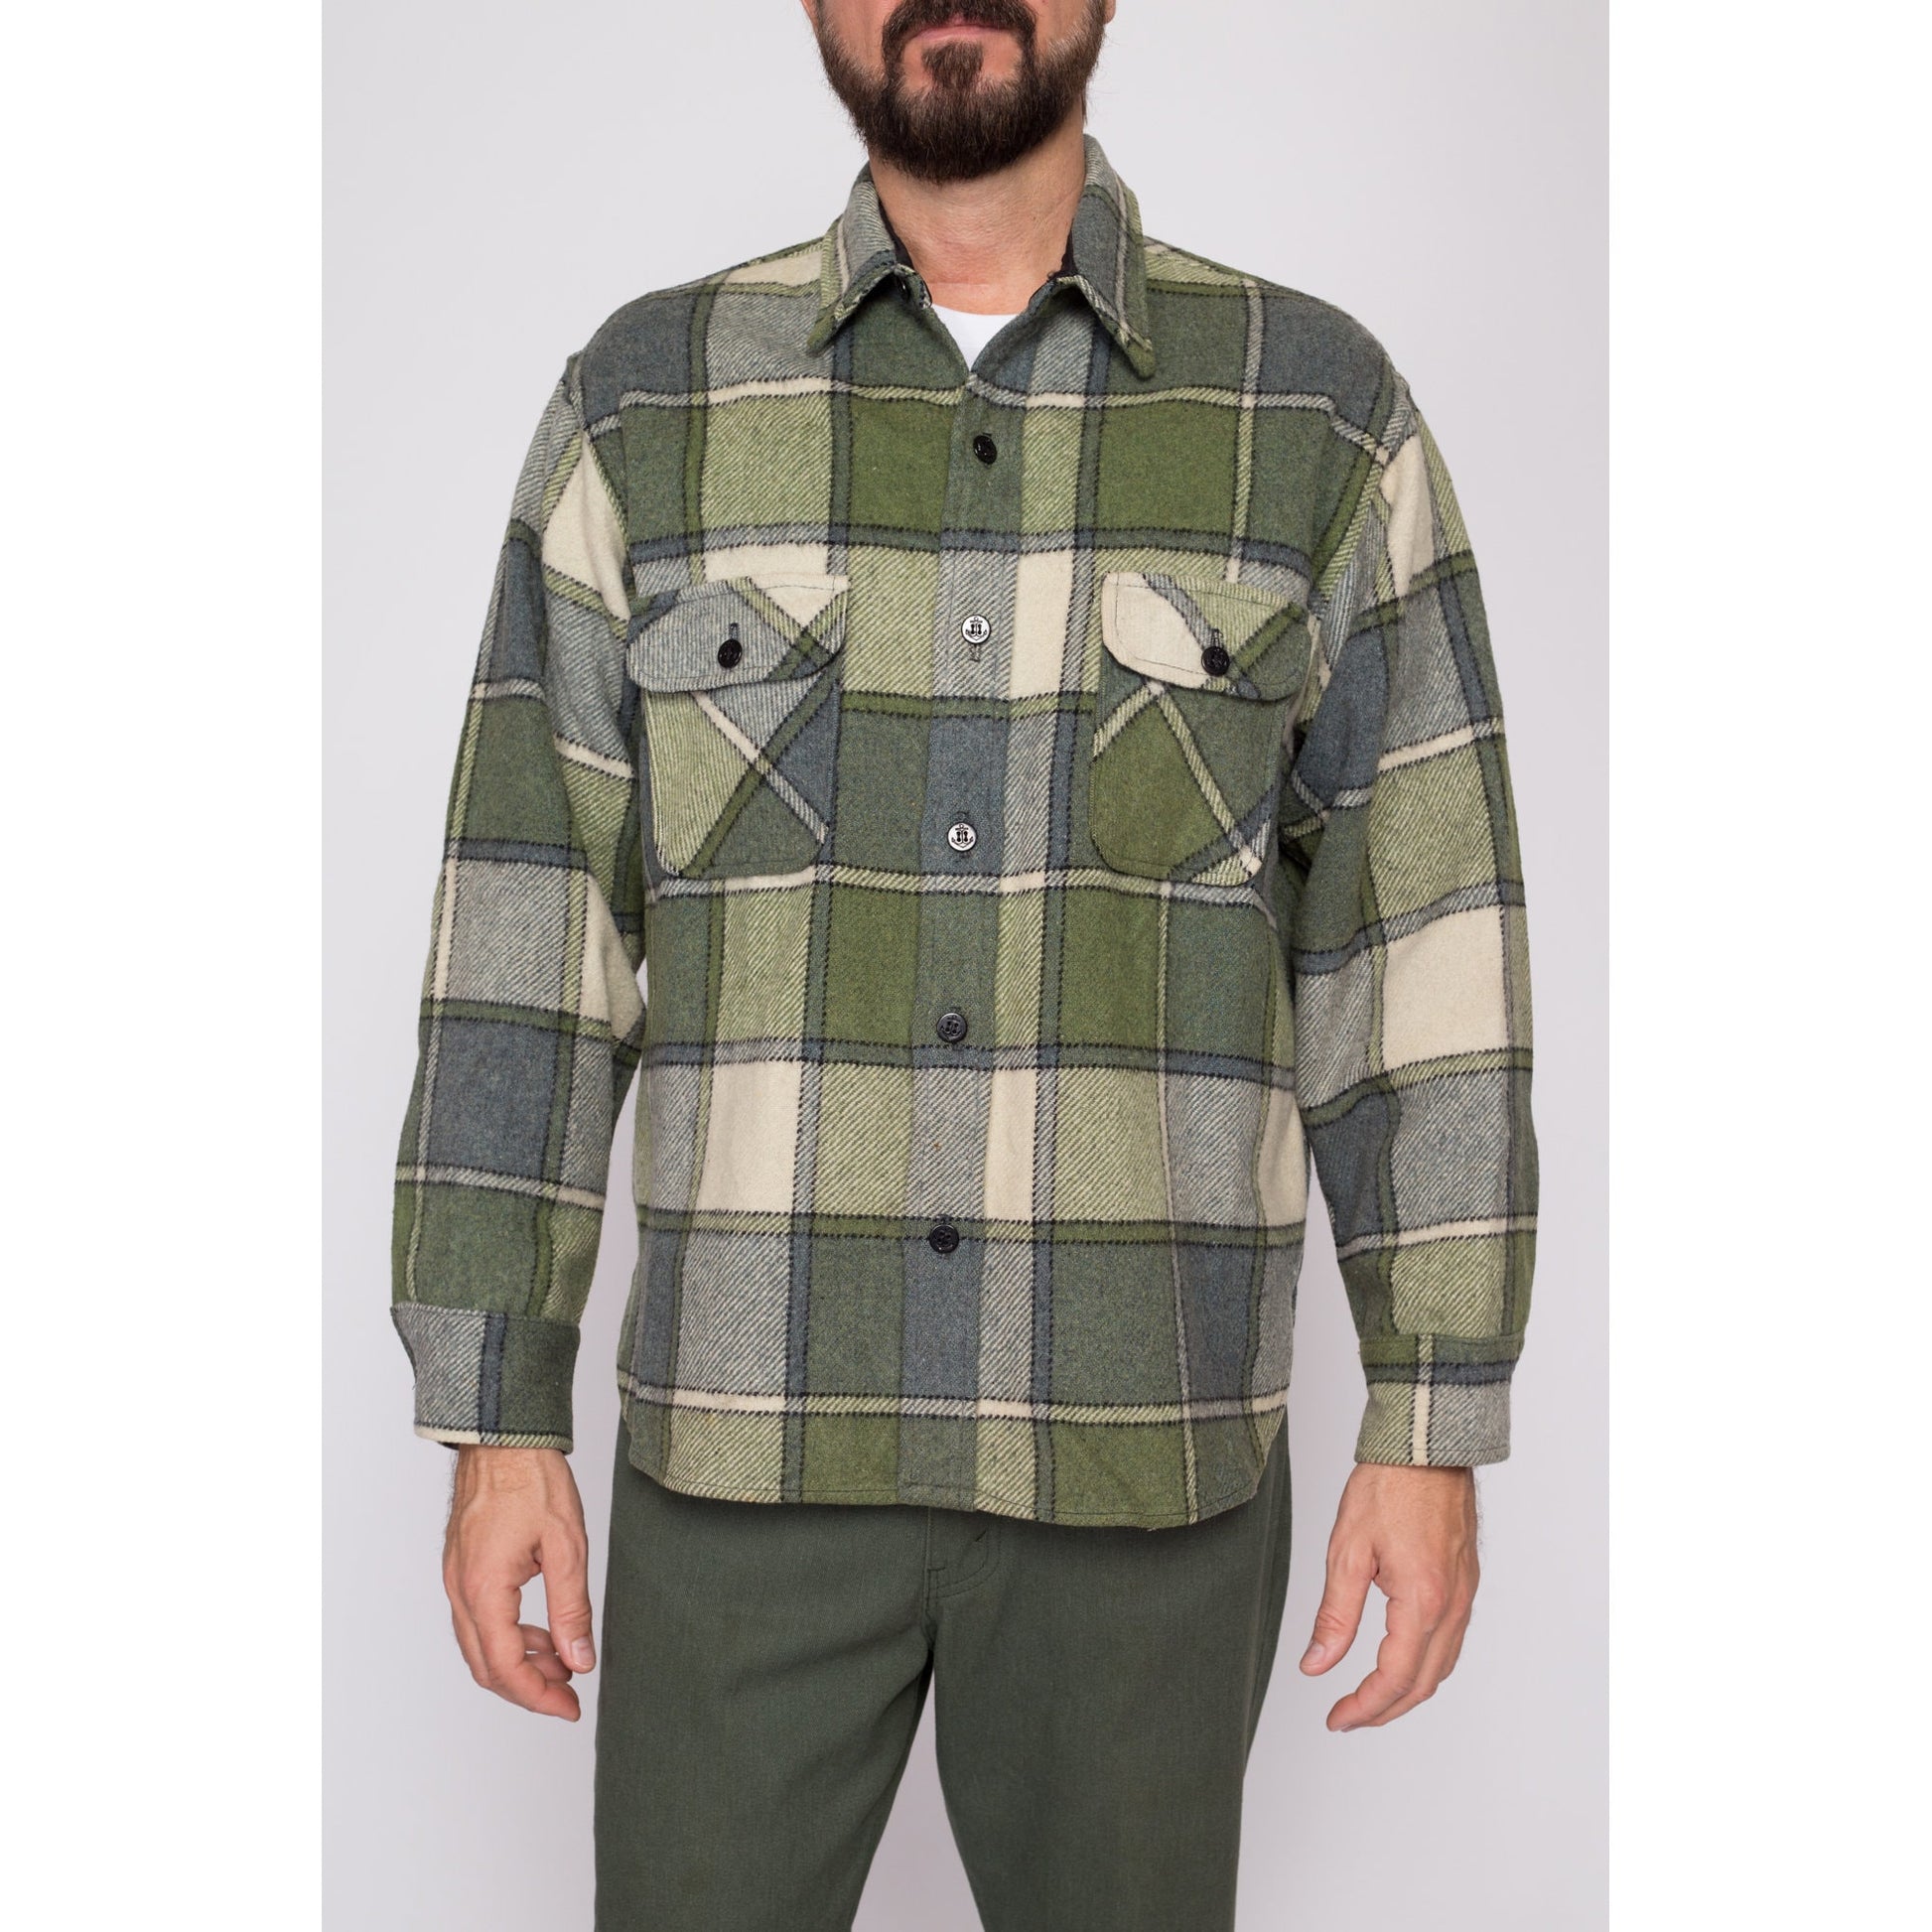 Large 70s Green Plaid Wool Shirt | Vintage Button Up Collared Overshirt Shacket